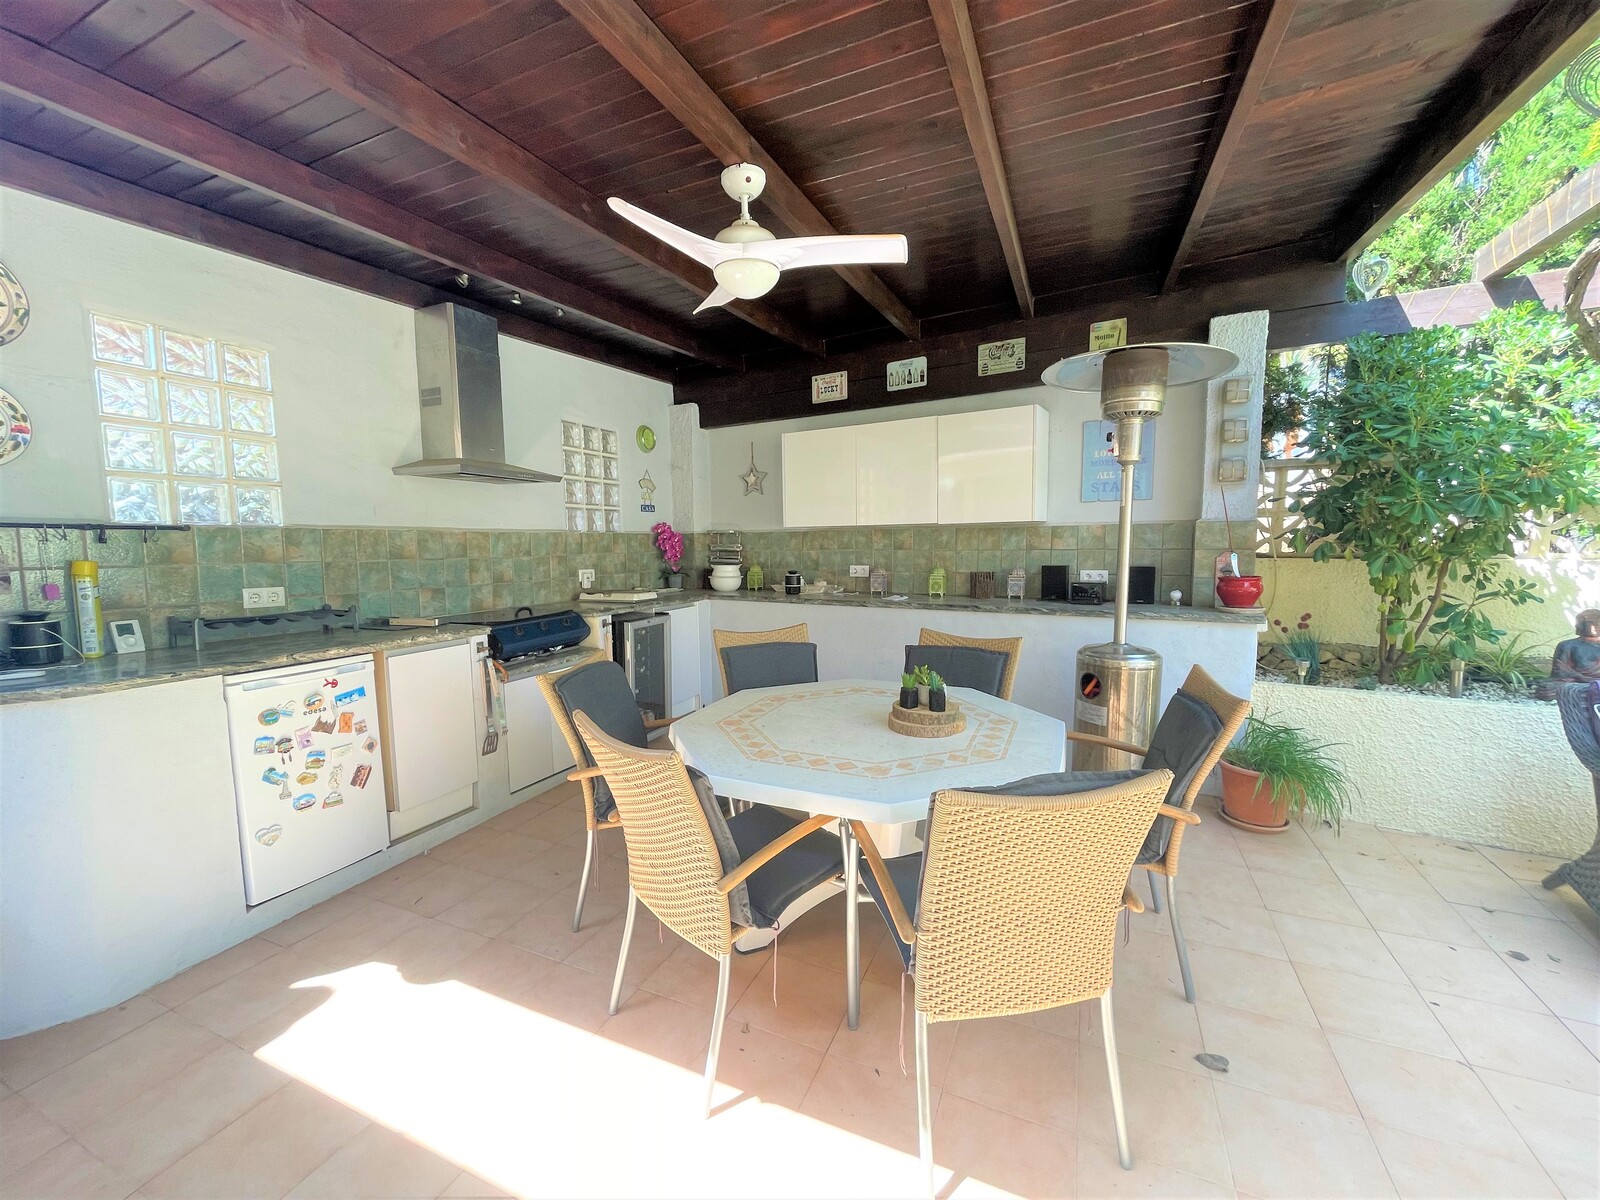 Stunning Detached Villa in Calpe, Within Walking Distance to Amenities.